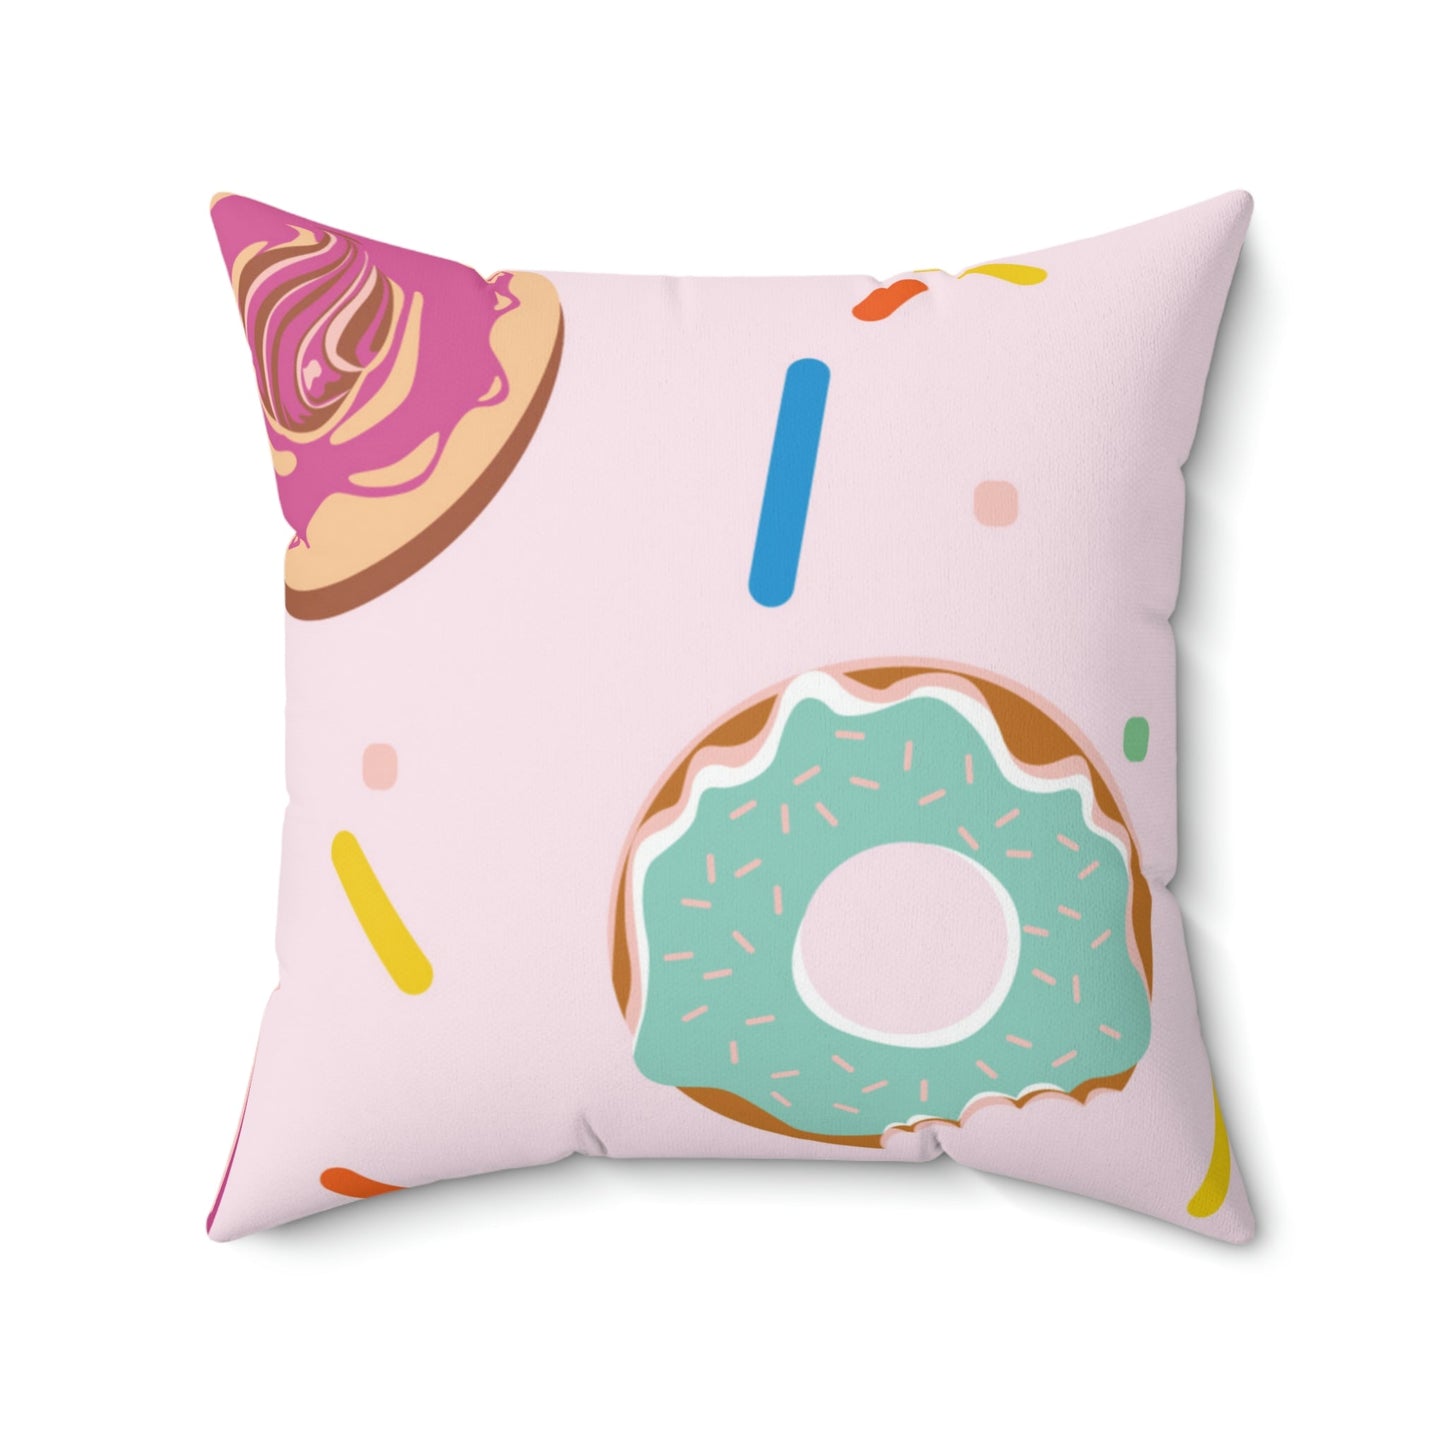 Donuts and Sprinkles Square Pillow Home Decor Pink Sweetheart